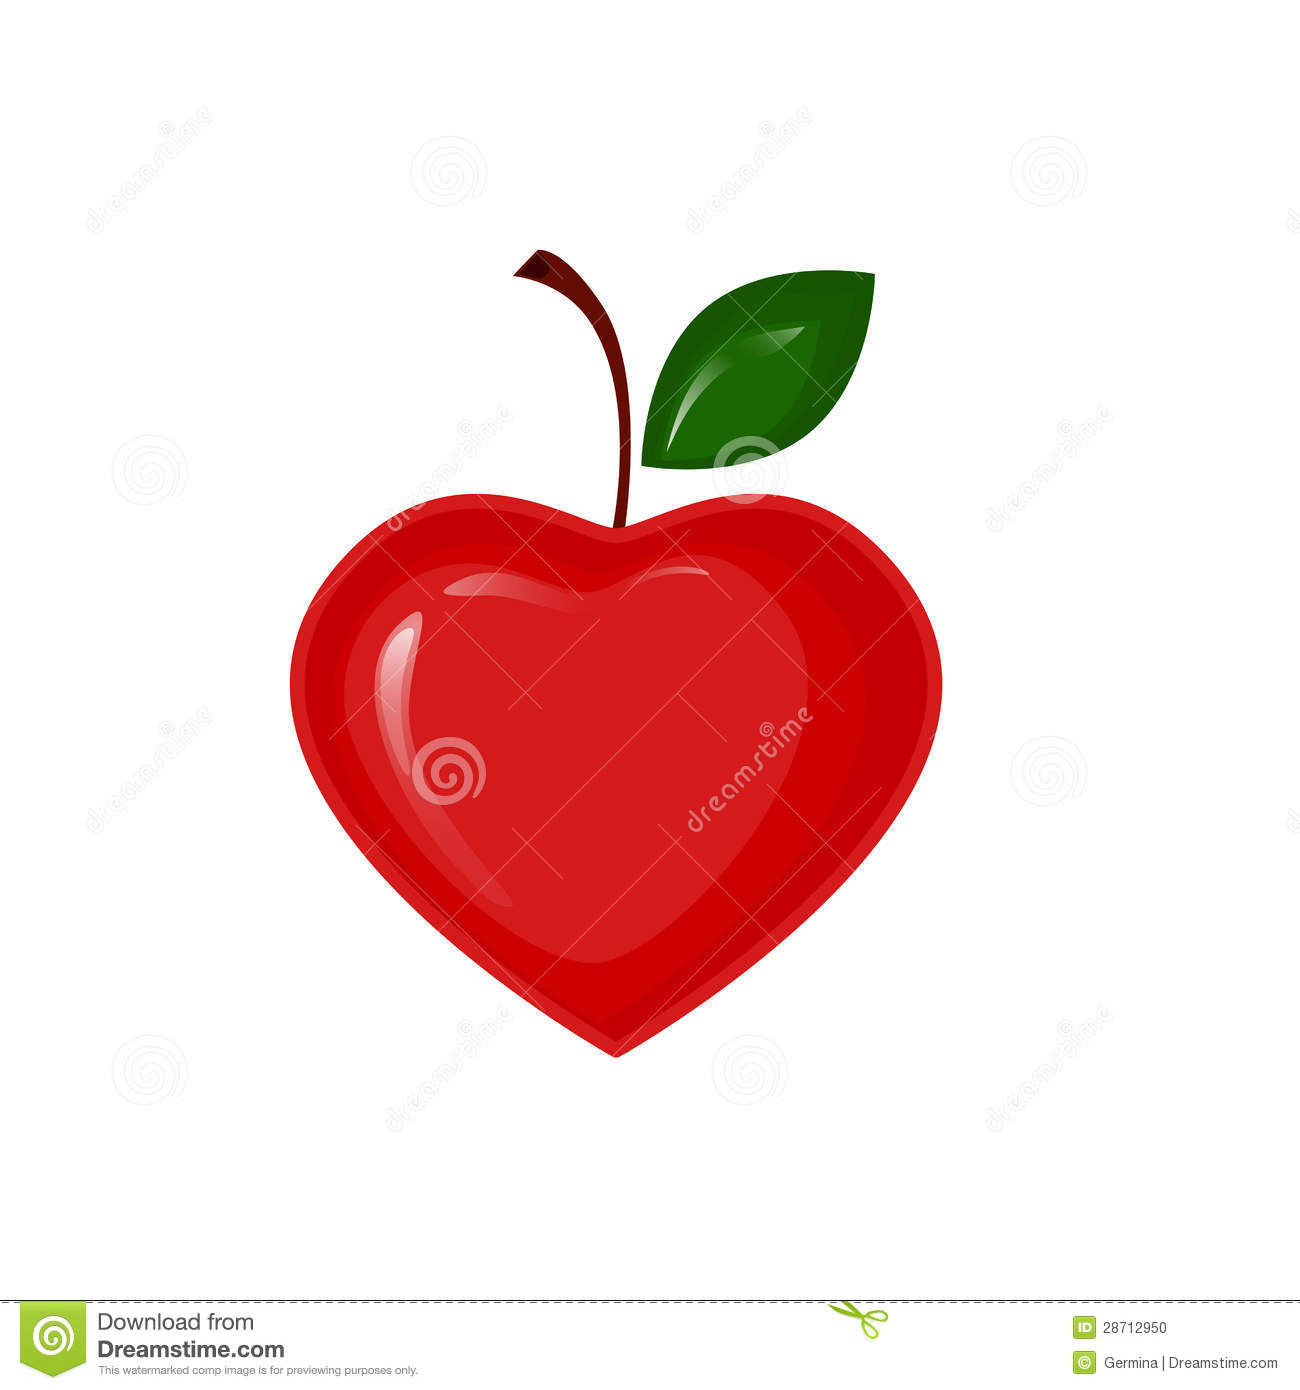 Vector Apple In The Shape Of Heart Stock Photo   Image  28712950